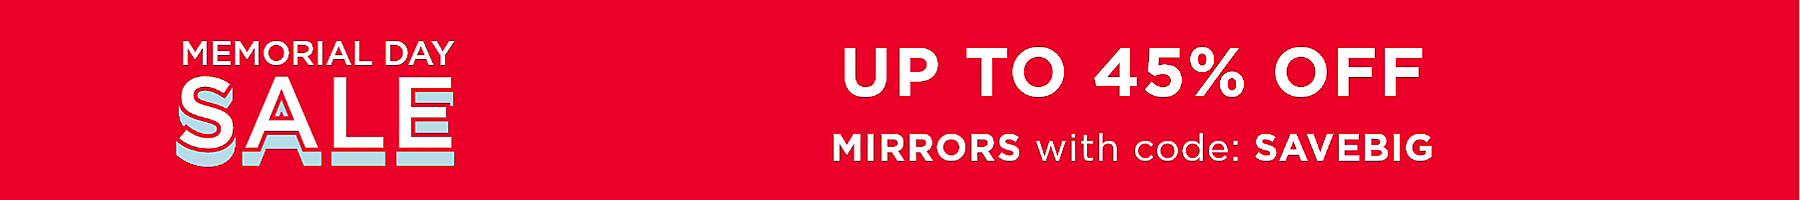 memorial day sale up to 45% off mirrors with code: SAVEBIG